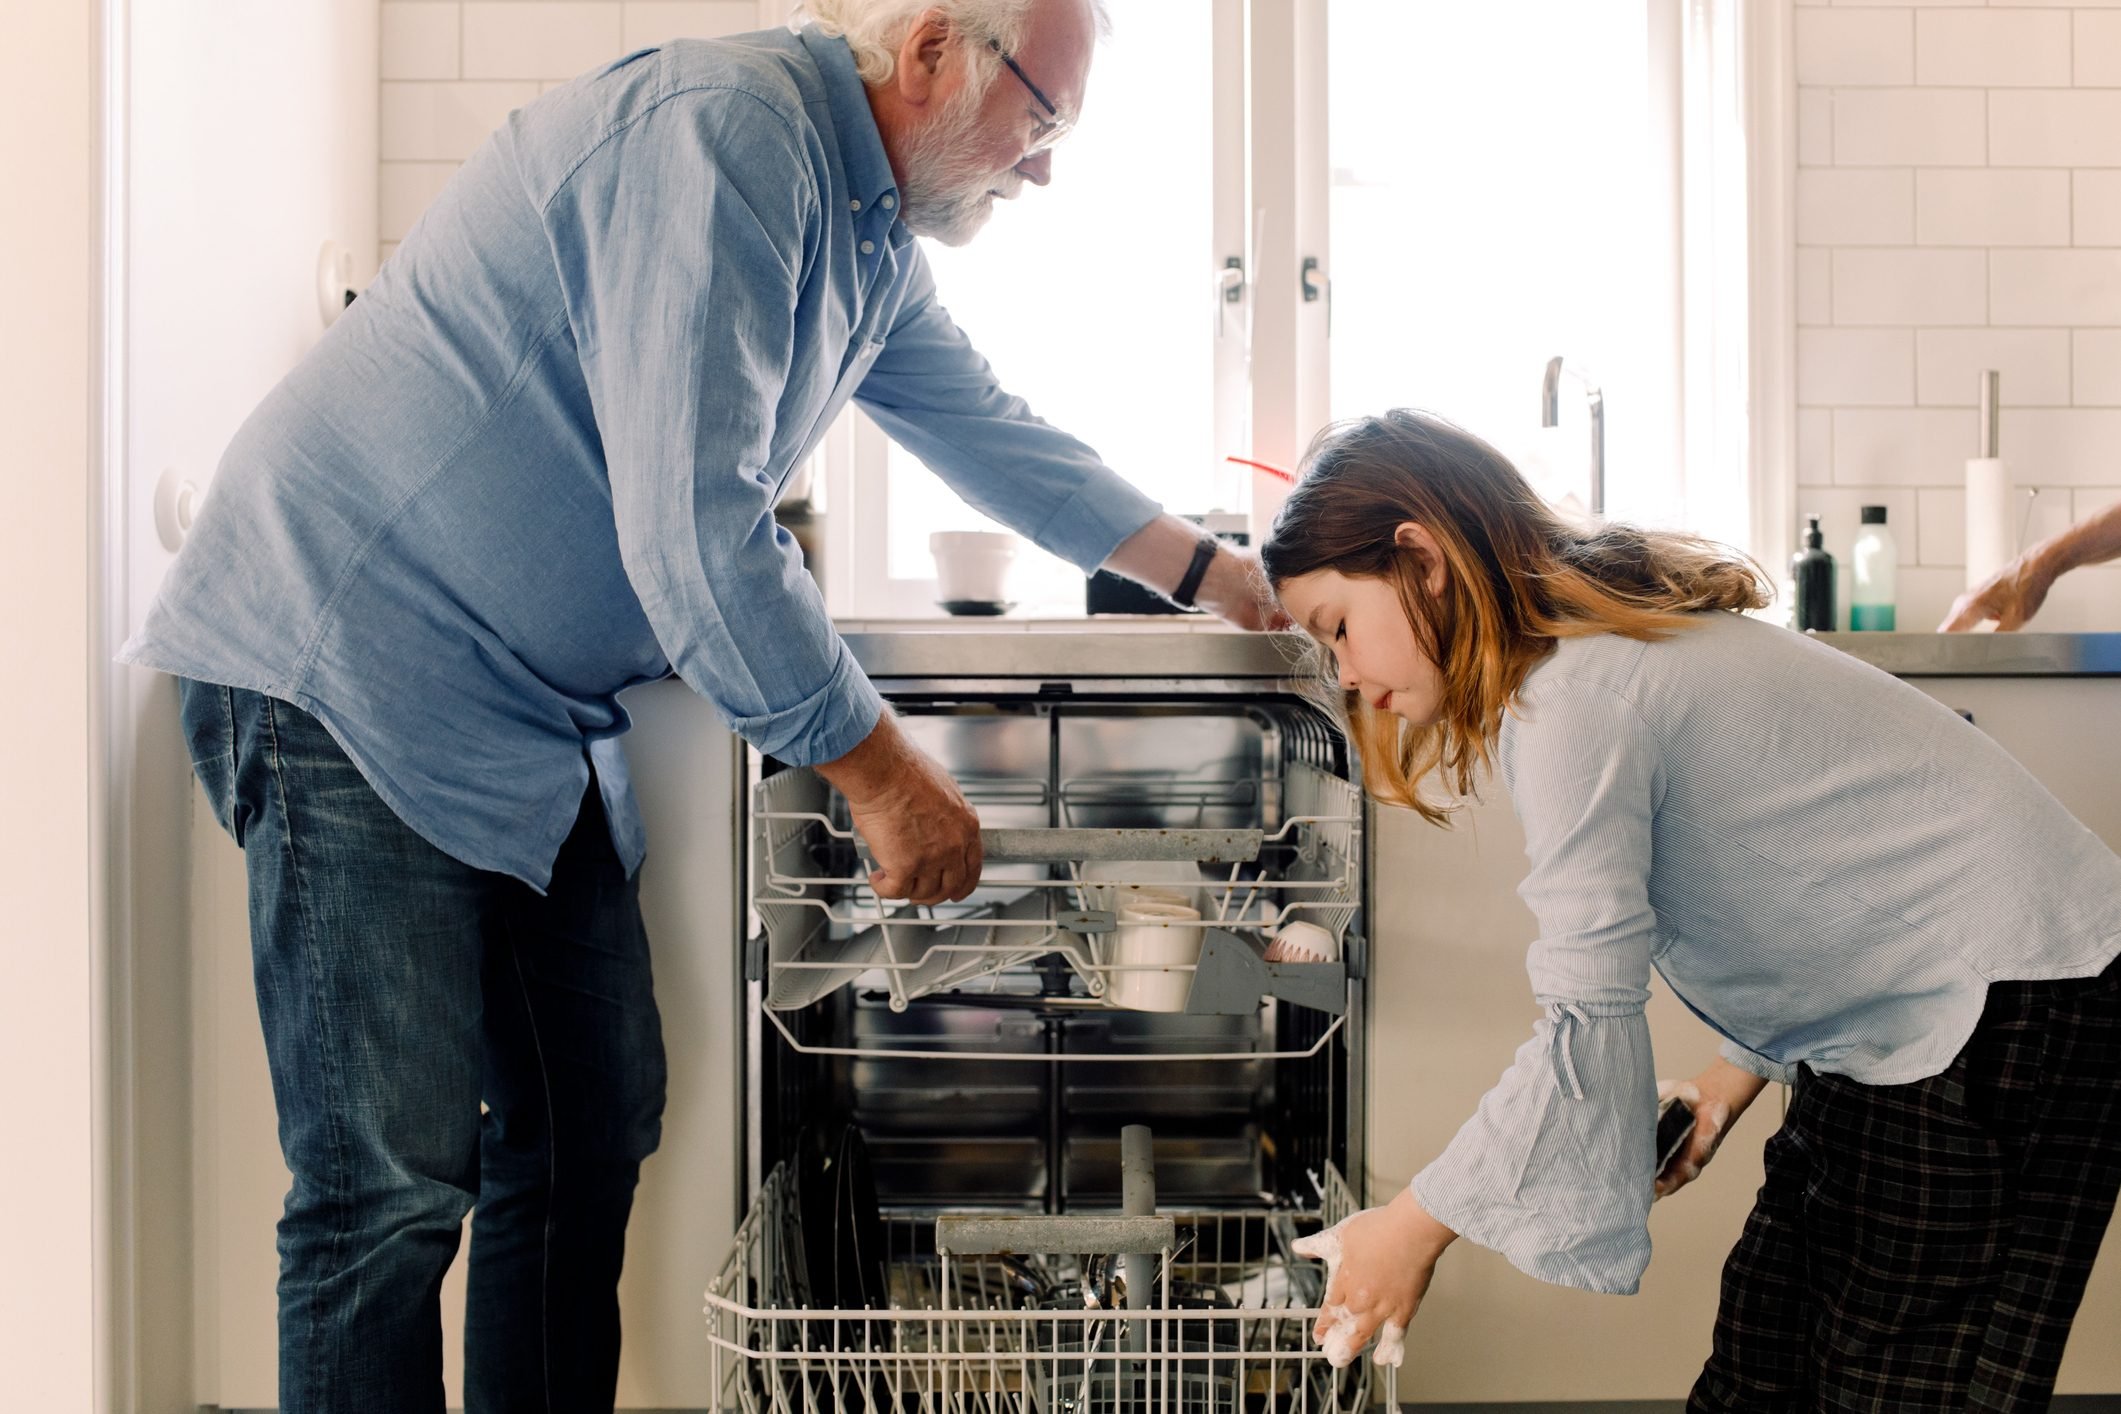 Grandfather assisting granddaughter in cleaning dishwasher at kitchen